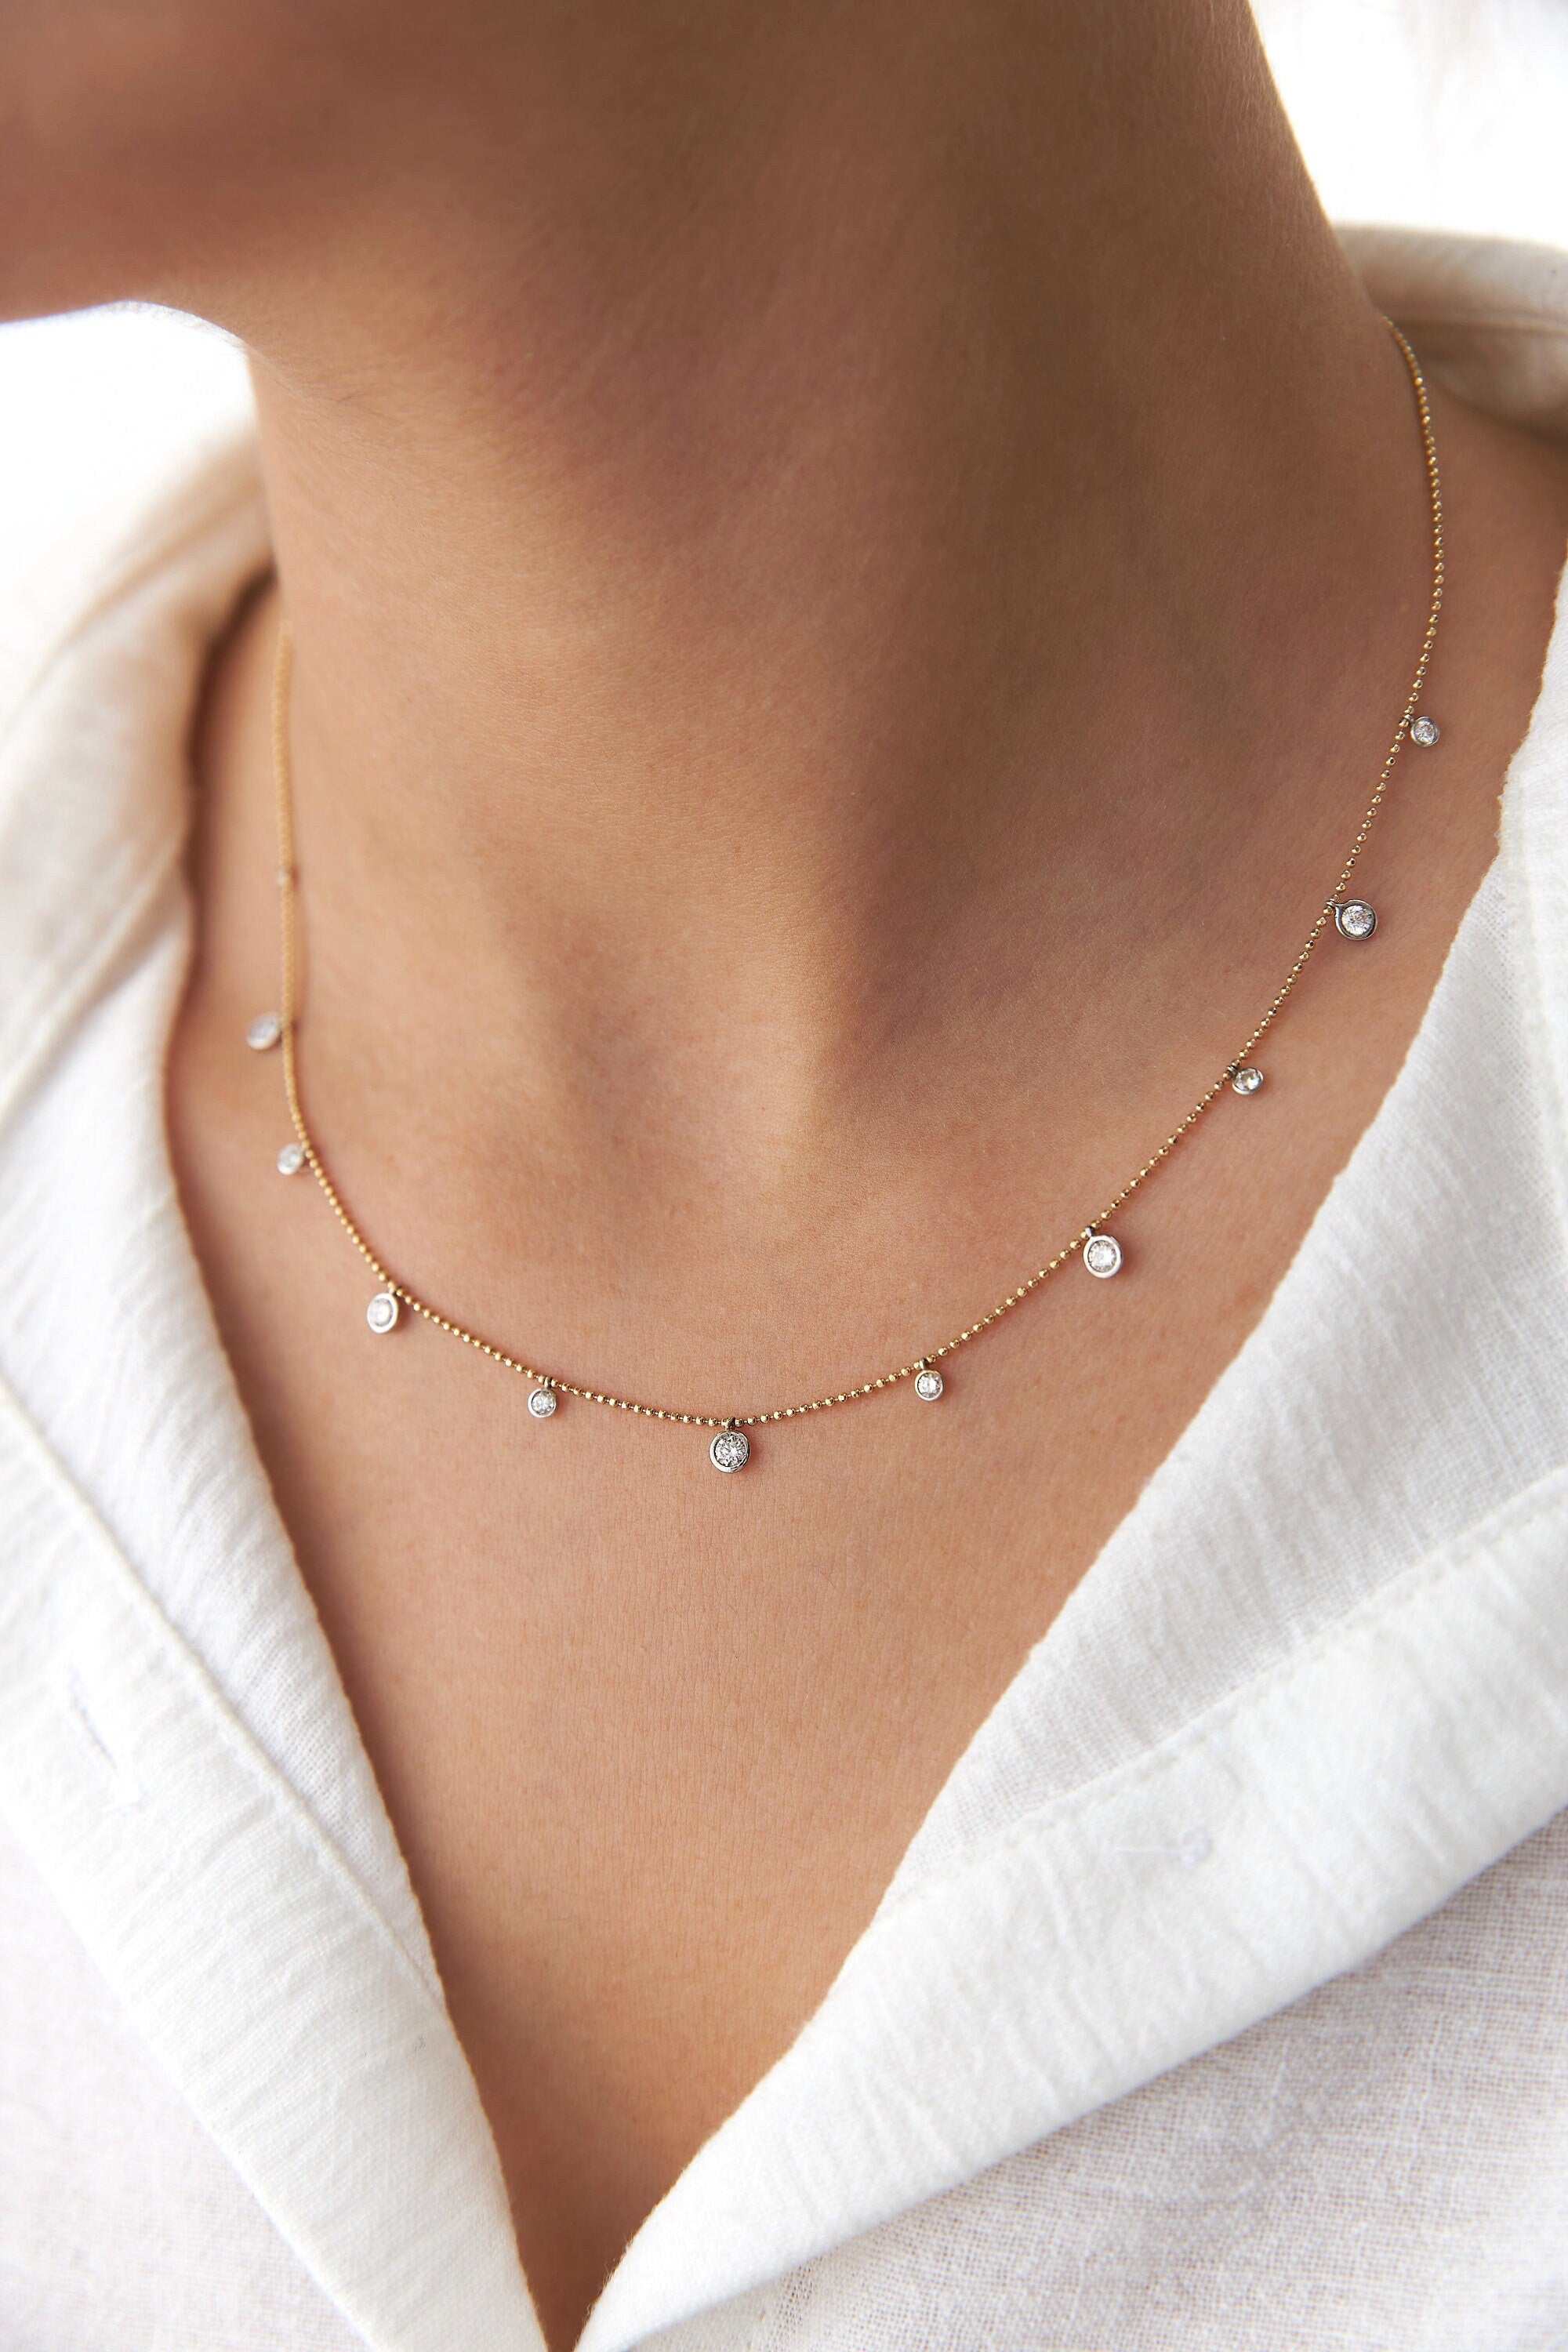 Diamond Ball Chain Station Necklace in 14K Gold